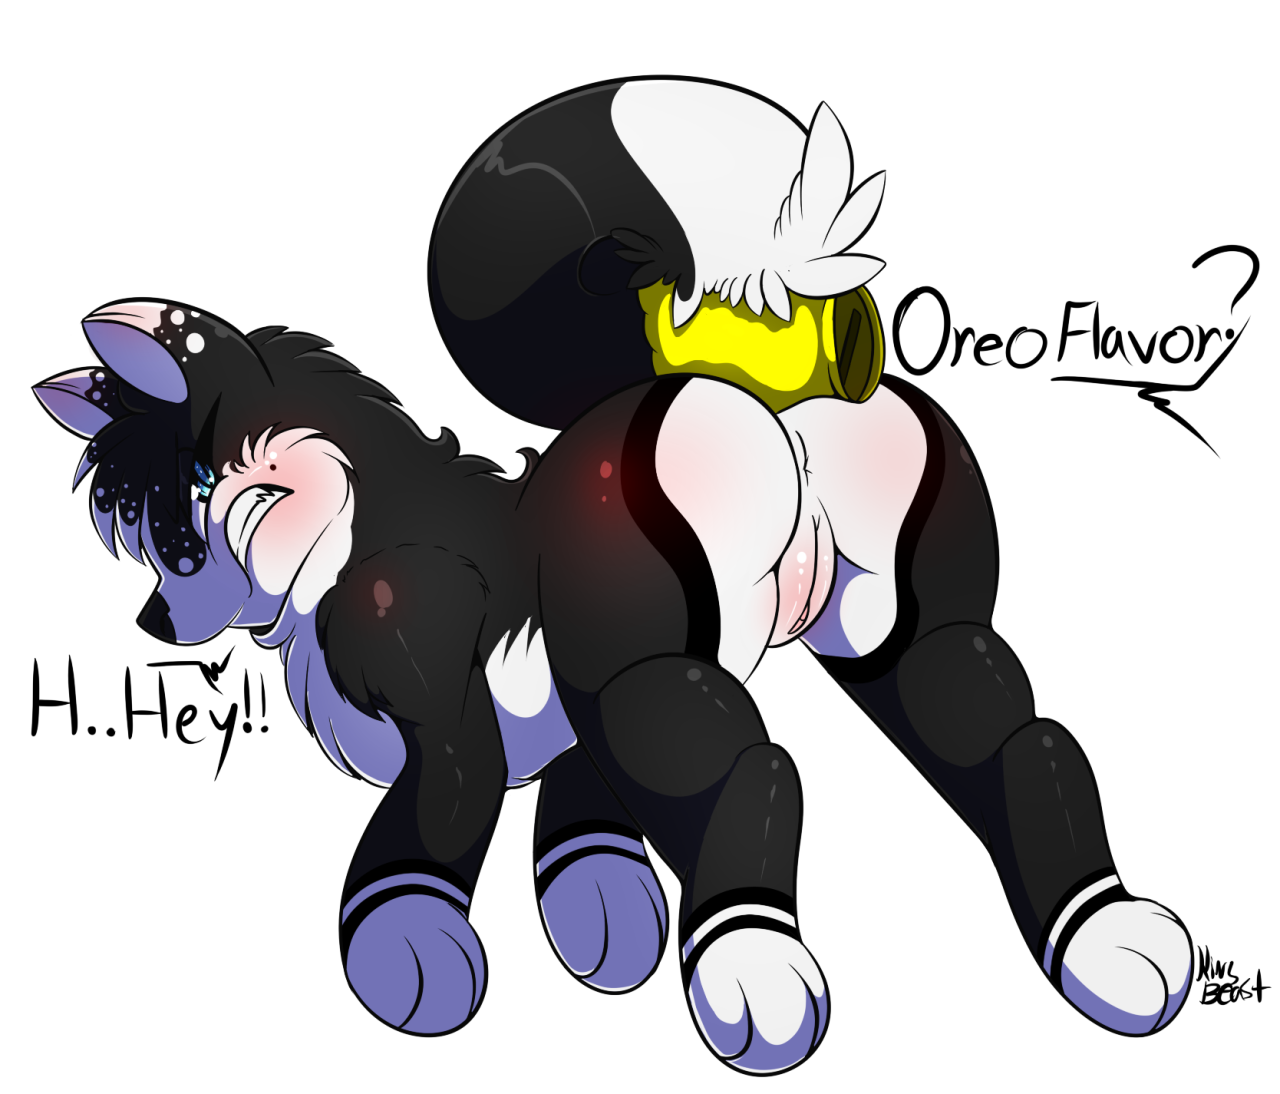 the-big-bad-wolf-art:A Oreo Dog for your taste buds! Shes the only one created so